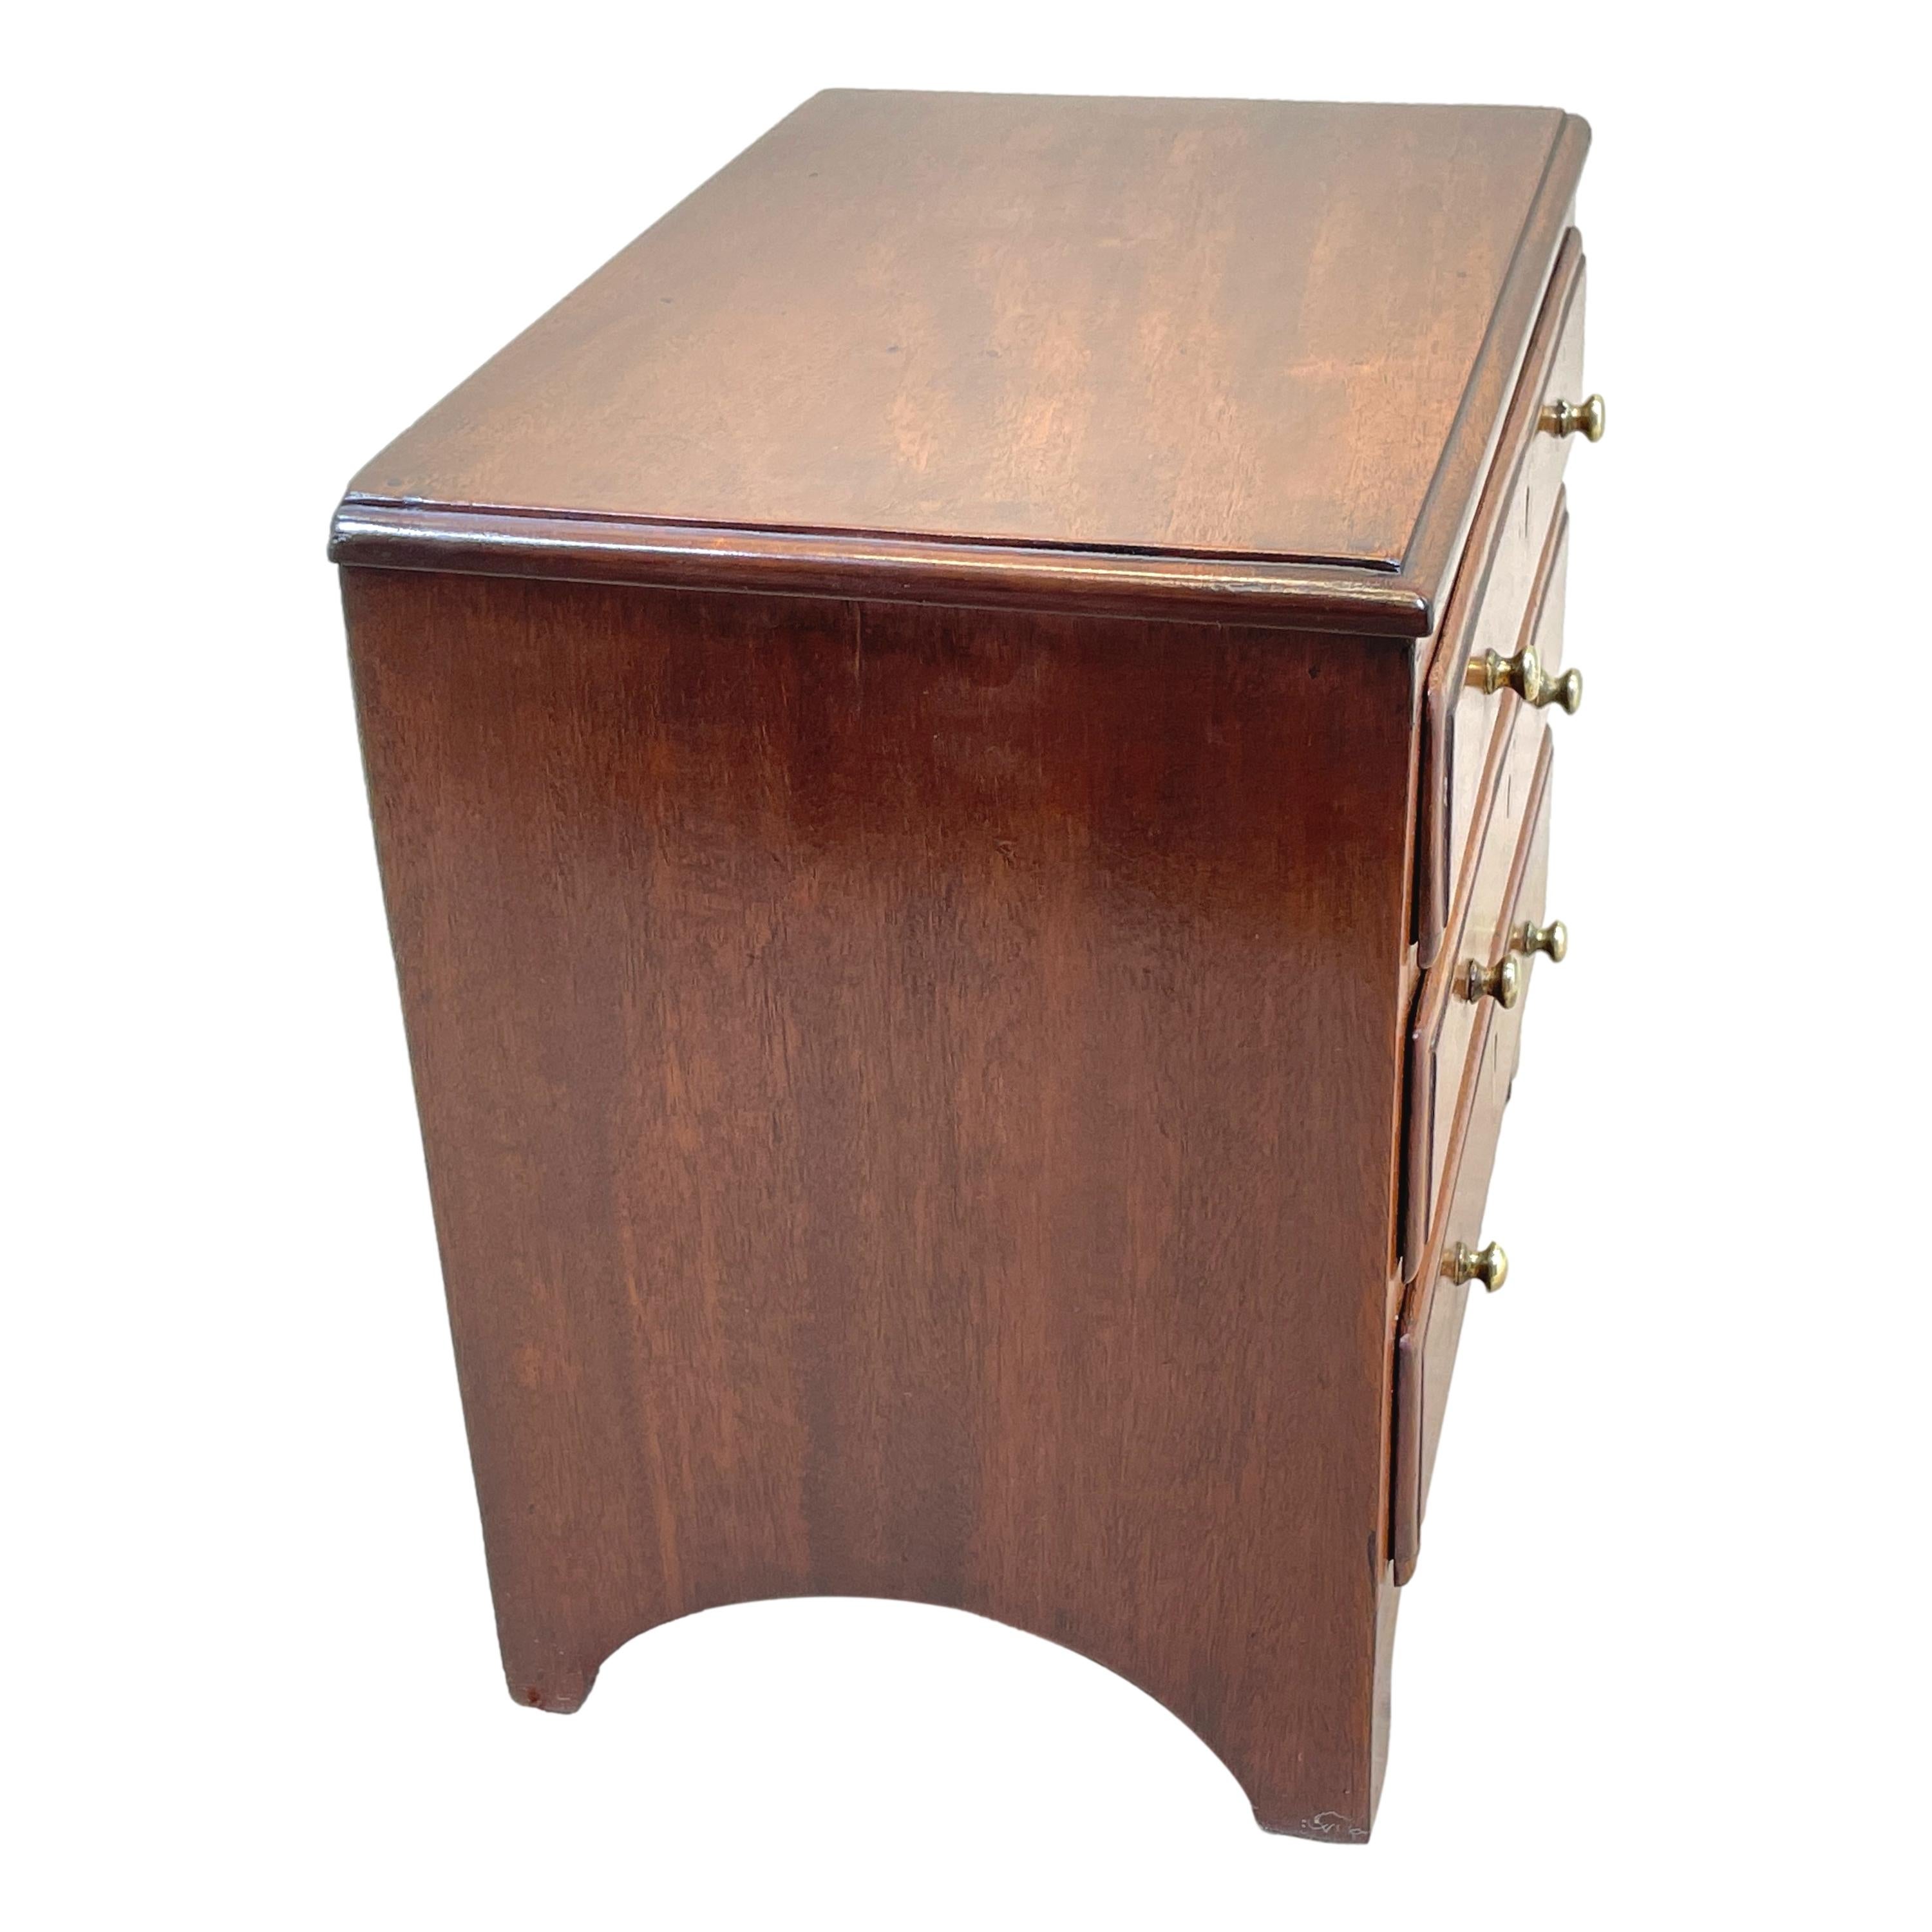 A Good Quality And Charming Early 19th Century Mahogany Miniature Chest, Having Well Figured Top Over Three Long Drawers With Original Brass Knobs And Boxwood Inlaid Escutcheons, Over Elegant Shaped Apron With Original Splayed Bracket